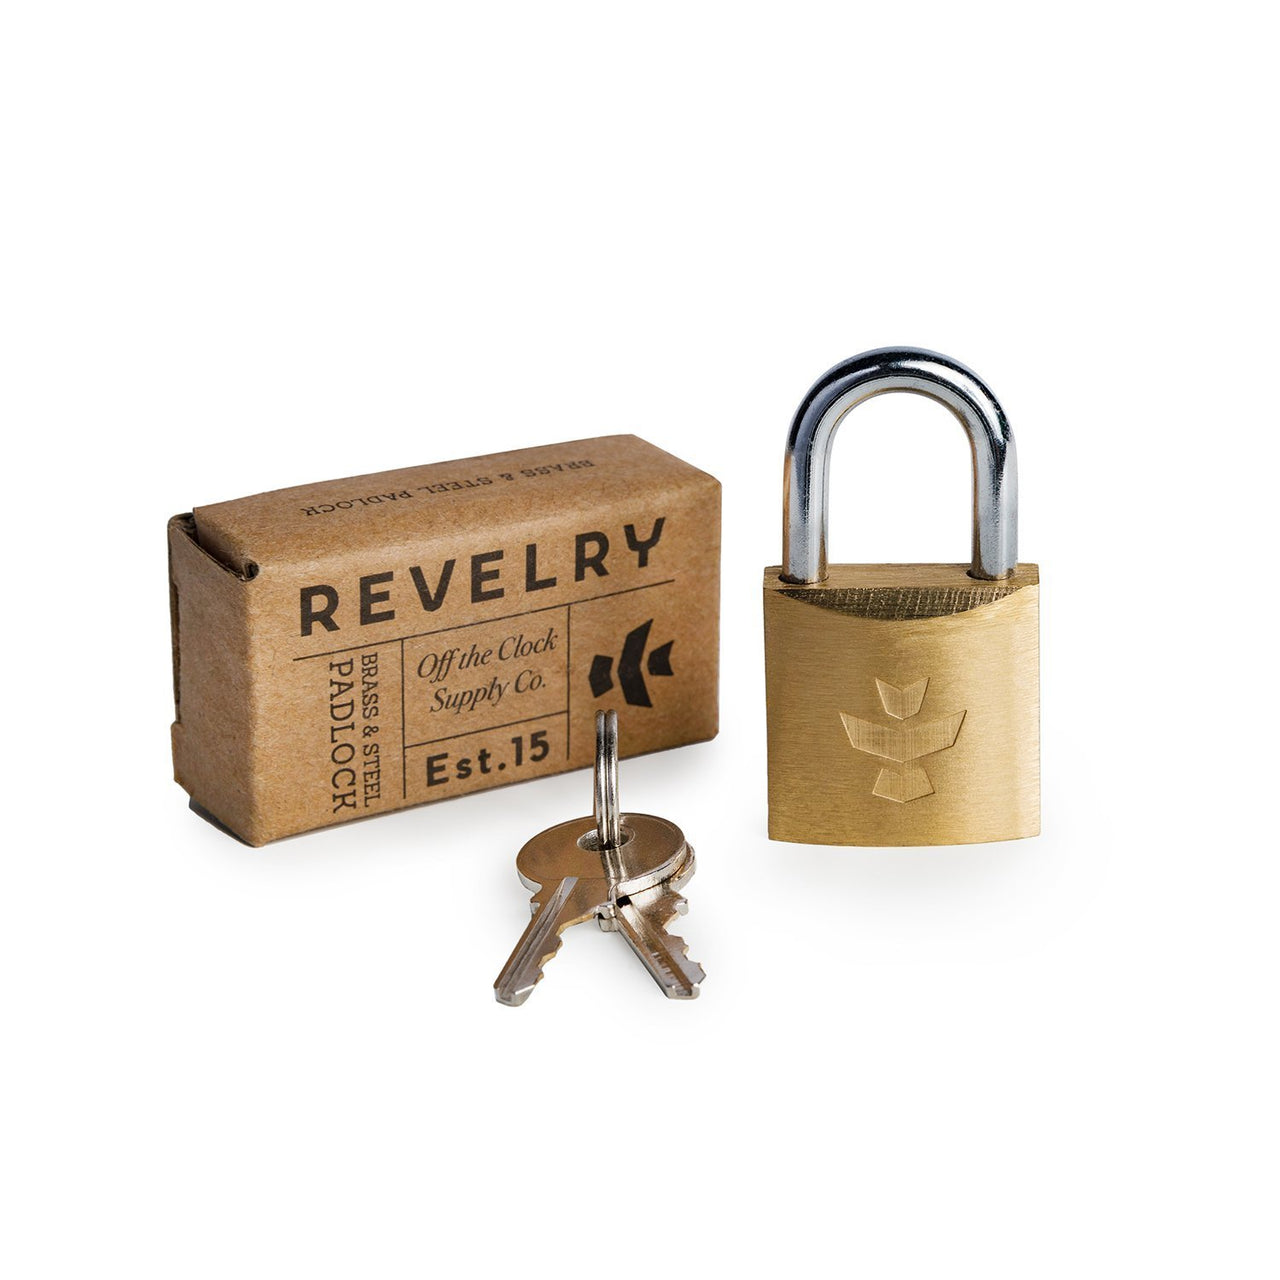 Revelry Luggage Lock | Bags & Cases | 420 Science